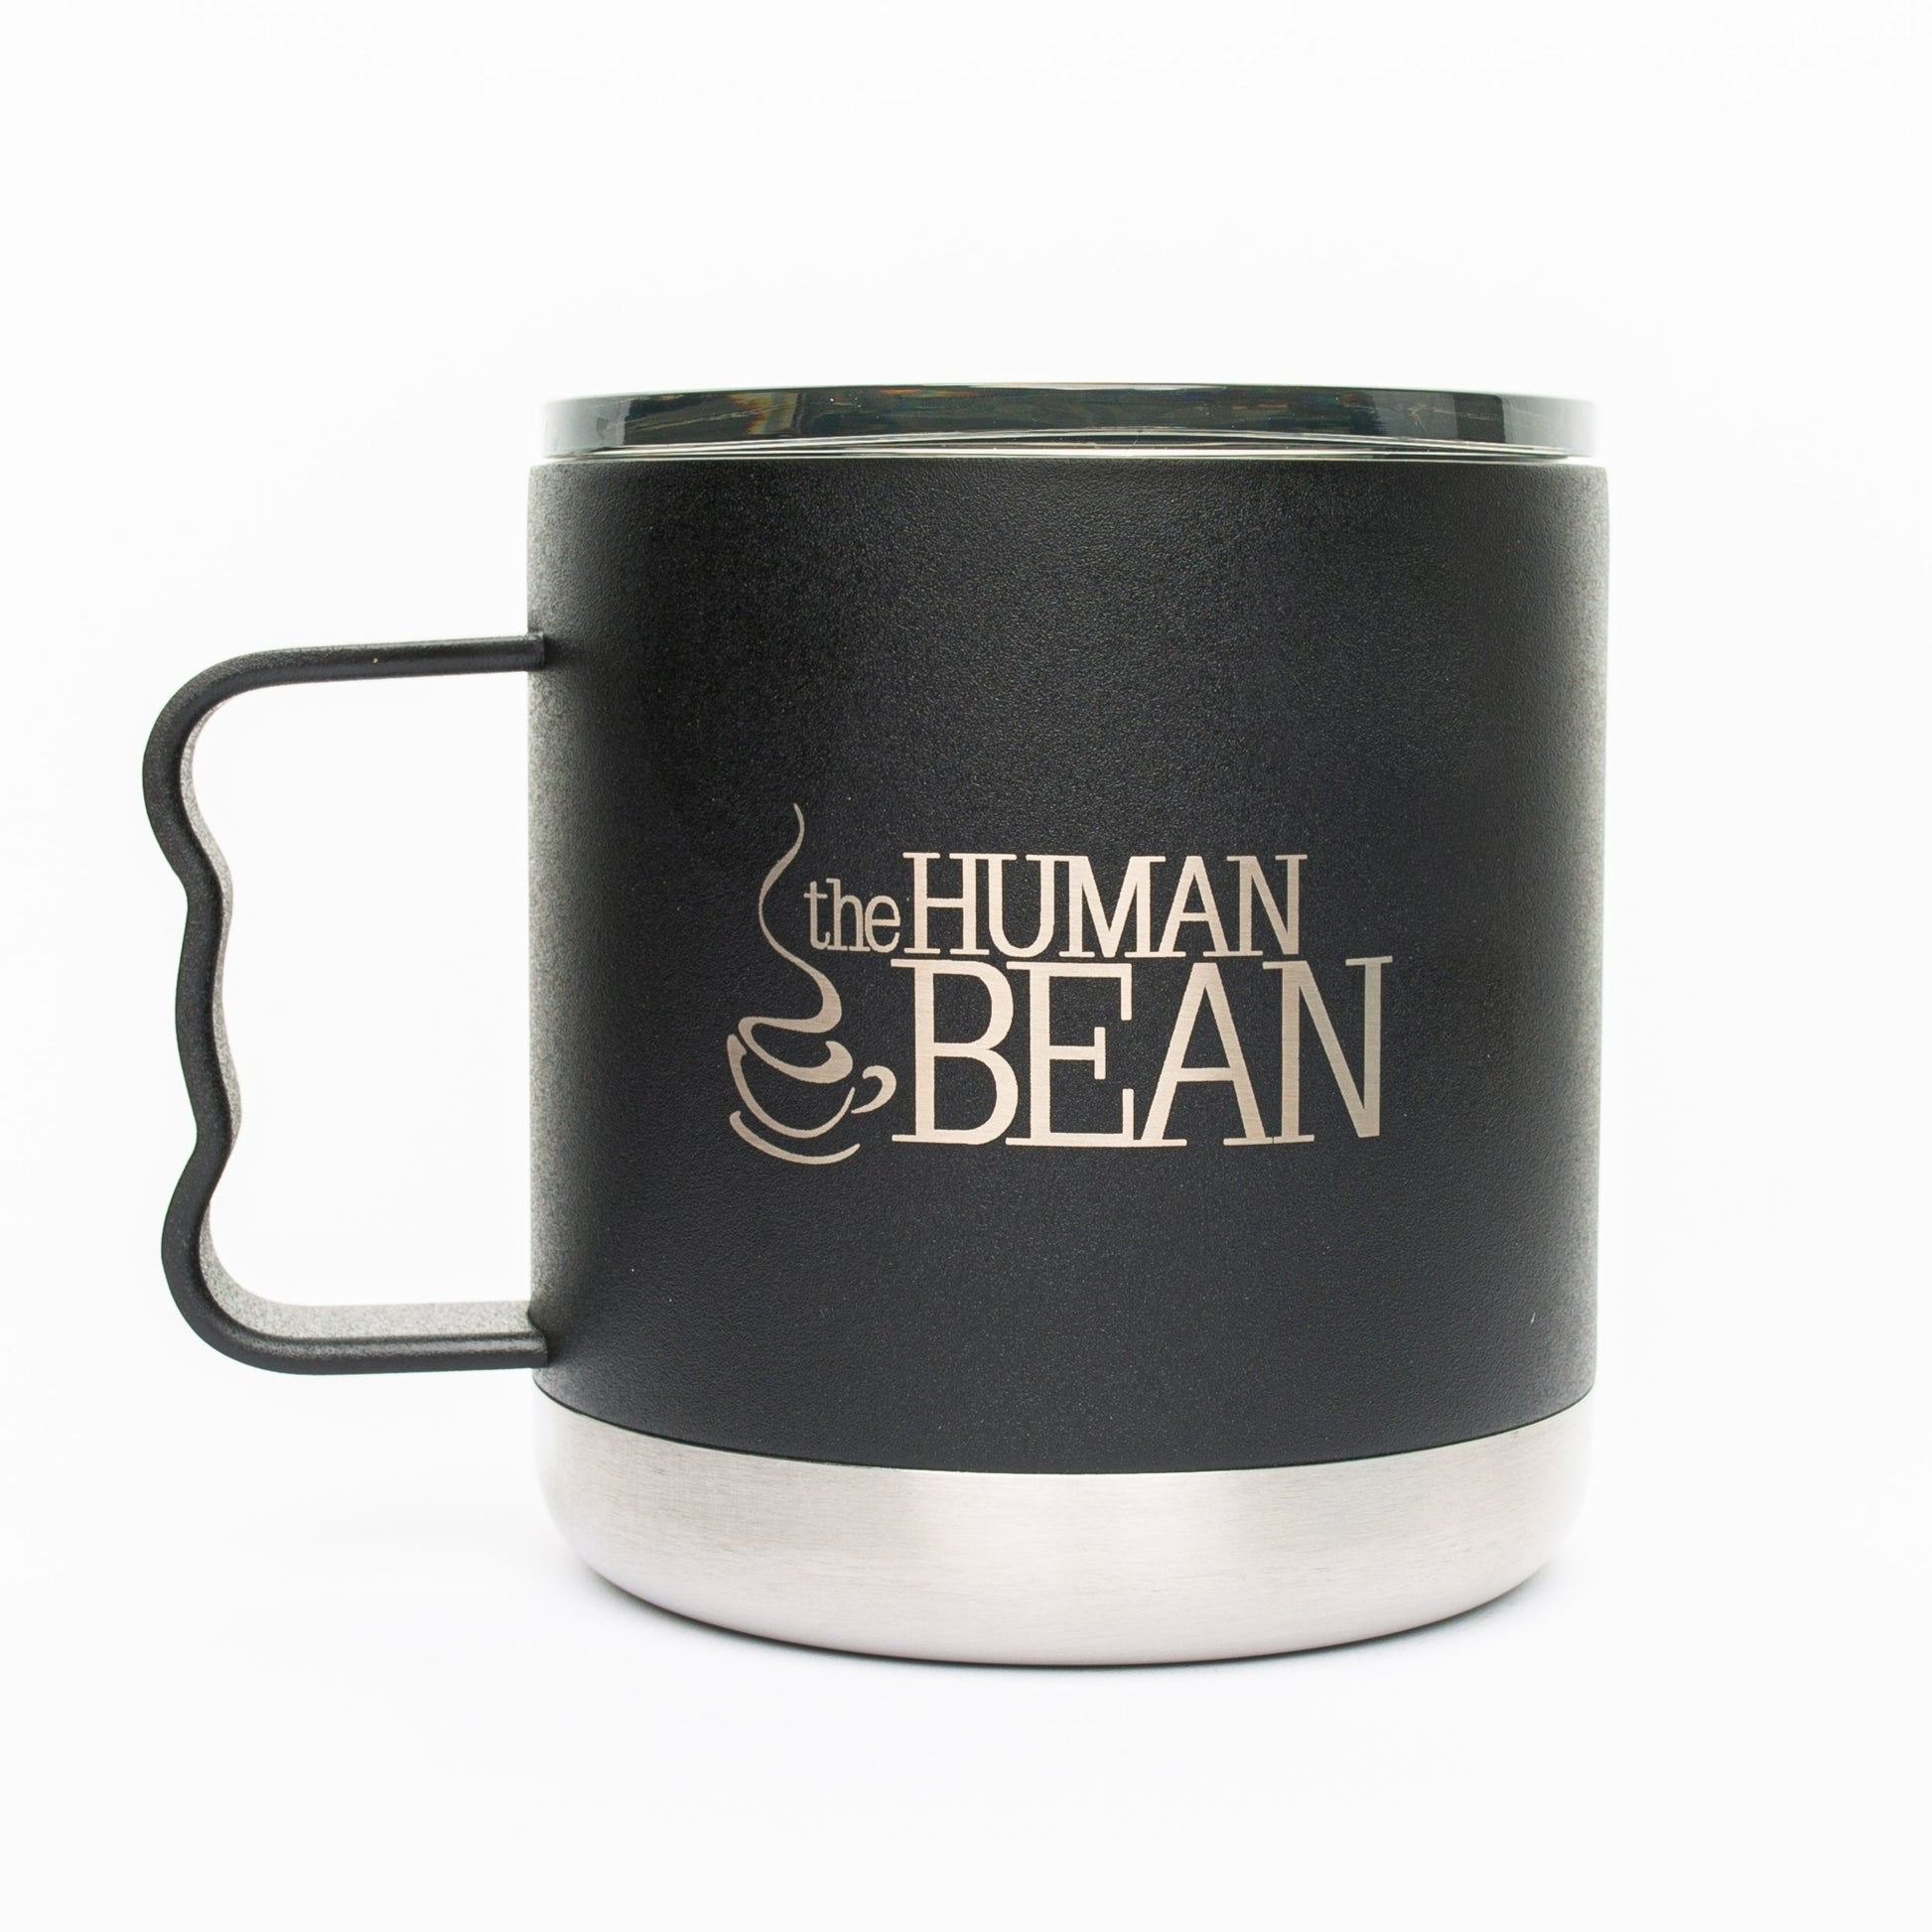 15oz Camp Mug with Slide Lid - FIFTY/FIFTY®– FIFTY/FIFTY Bottles